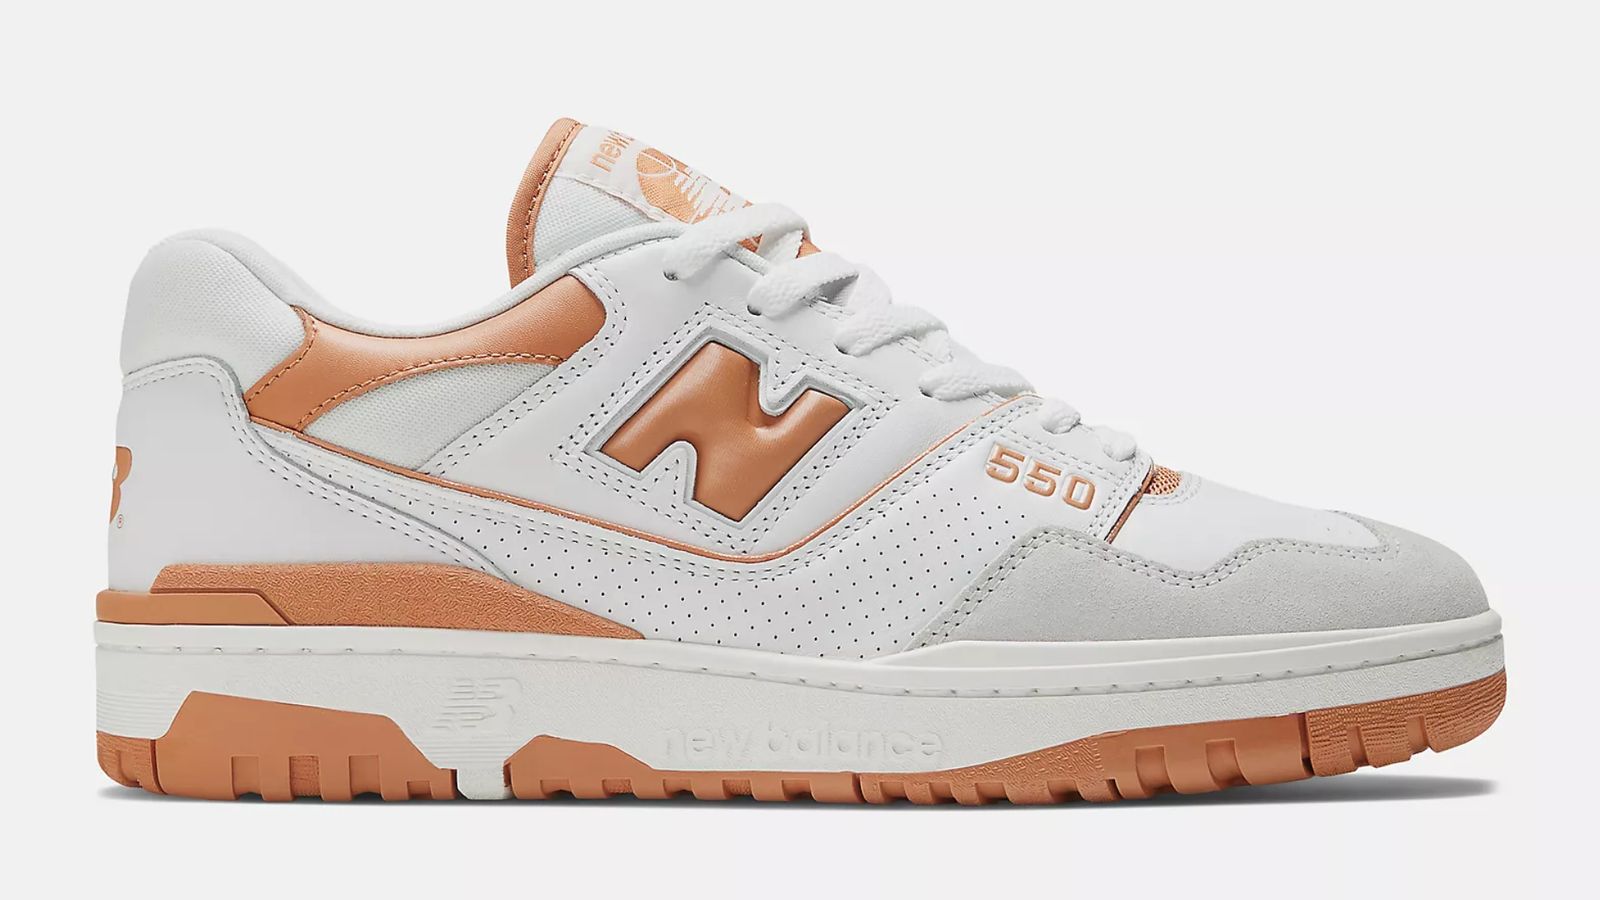 New Balance 550 product image of a white and grey shoe with sepia accents.